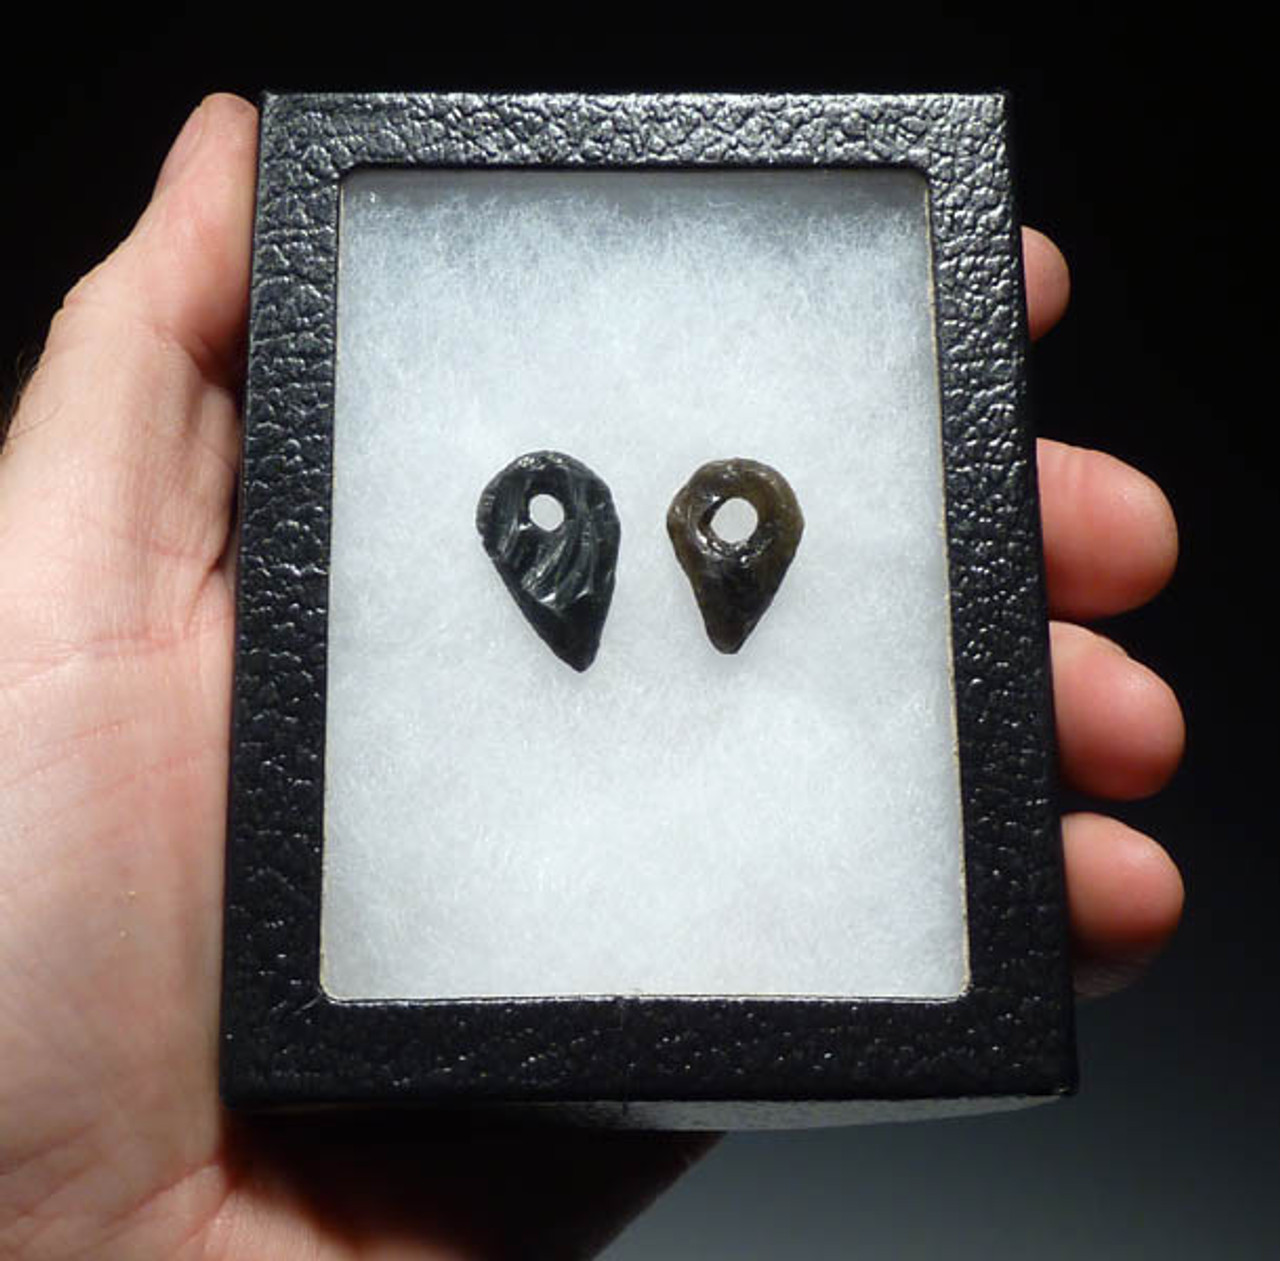 PC011  -   RARE UNUSUAL PAIR OF PIERCED SYMBOLIC OBSIDIAN TEARDROP OBJECTS FROM THE ANCIENT PRE-COLUMBIAN TEOTIHUACAN CULTURE